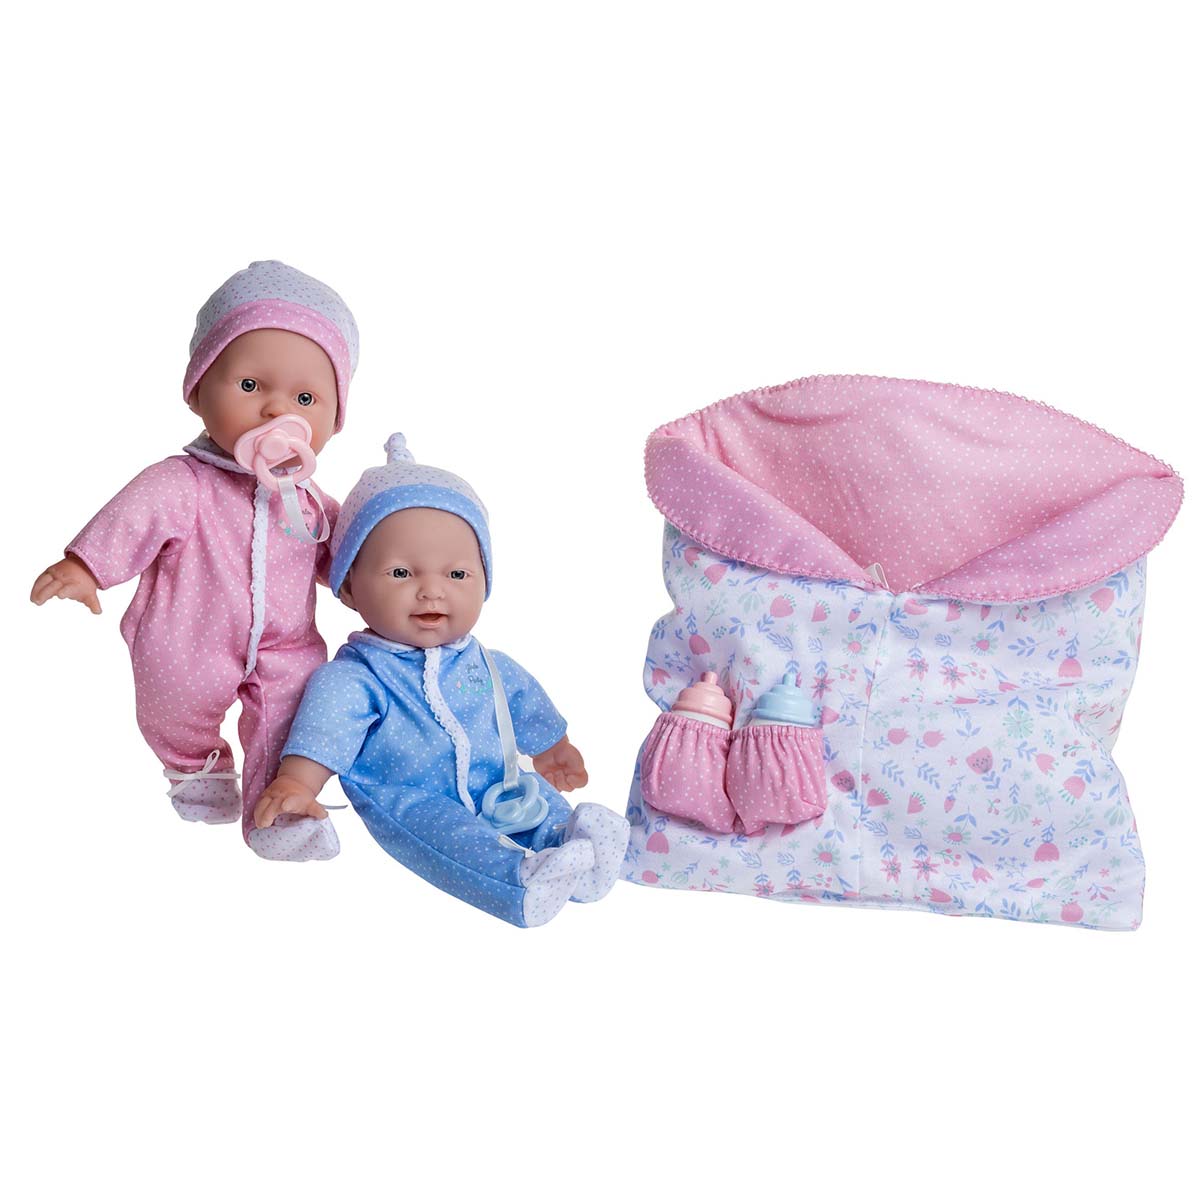 JC Toys La Baby Twins Sleeping Bag Gift Set |11-inch Small Soft Body Dolls Washable |Removable Pink and Blue Outfits, Pacifier & Blanket | 12 Months+